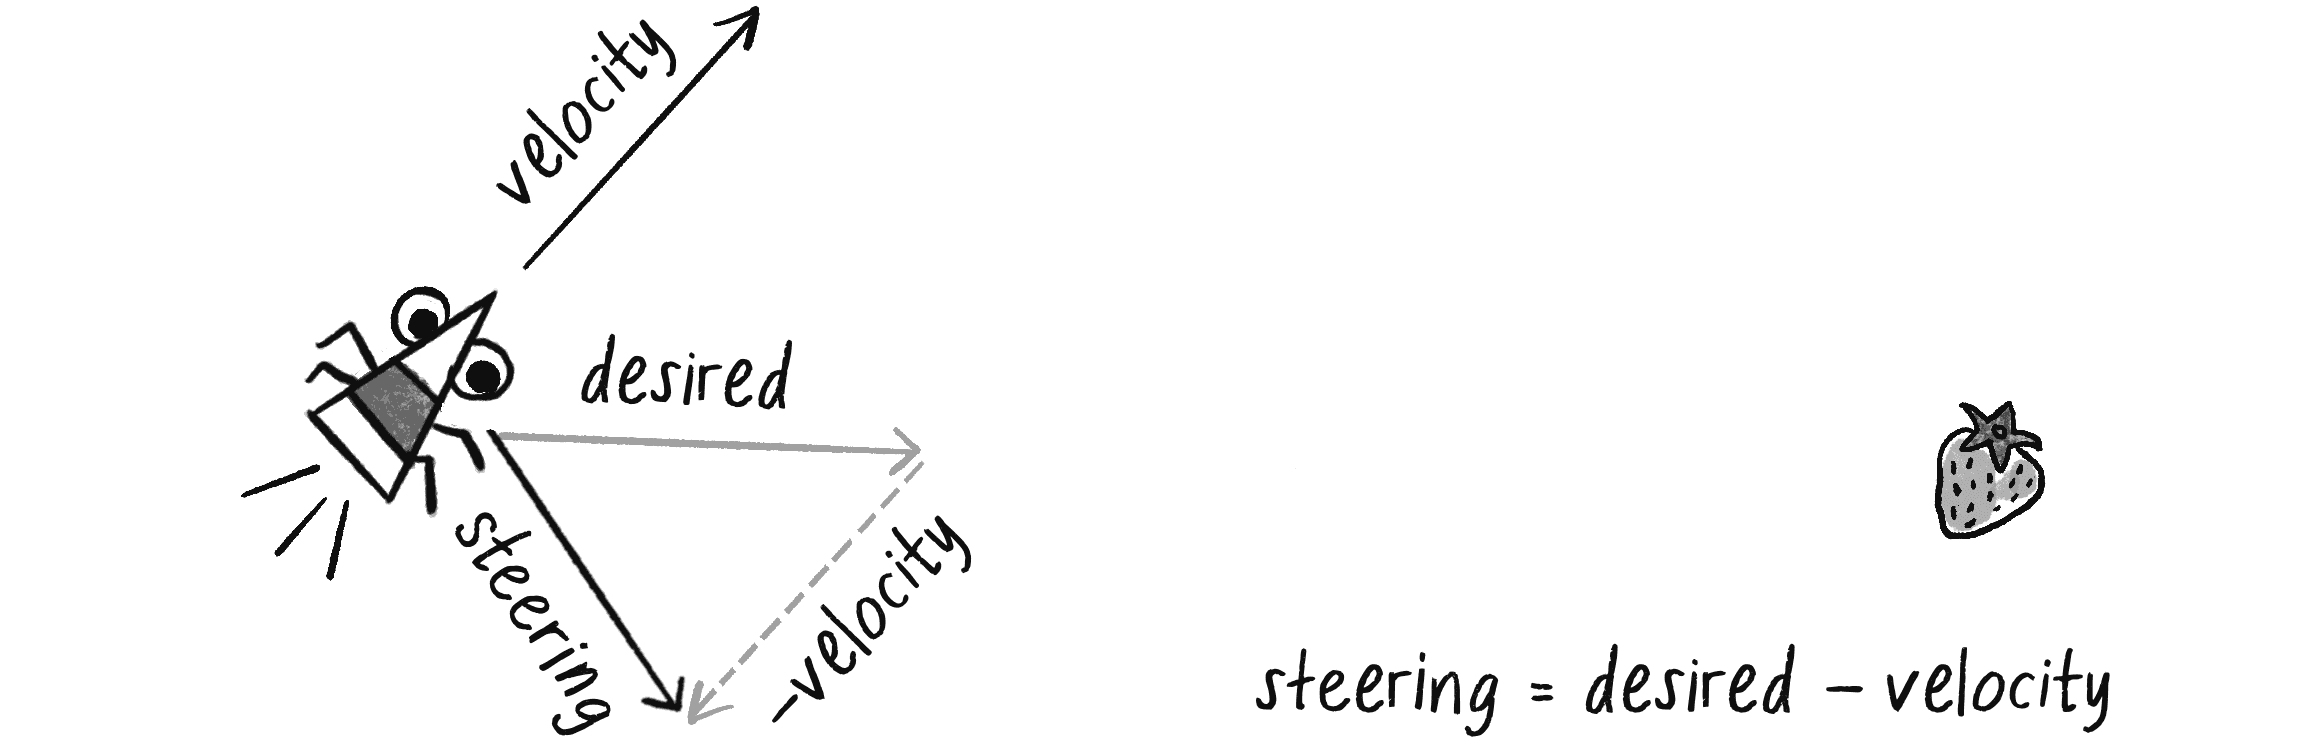 Figure 5.4: The vehicle applies a steering force equal to its desired velocity minus its current velocity.